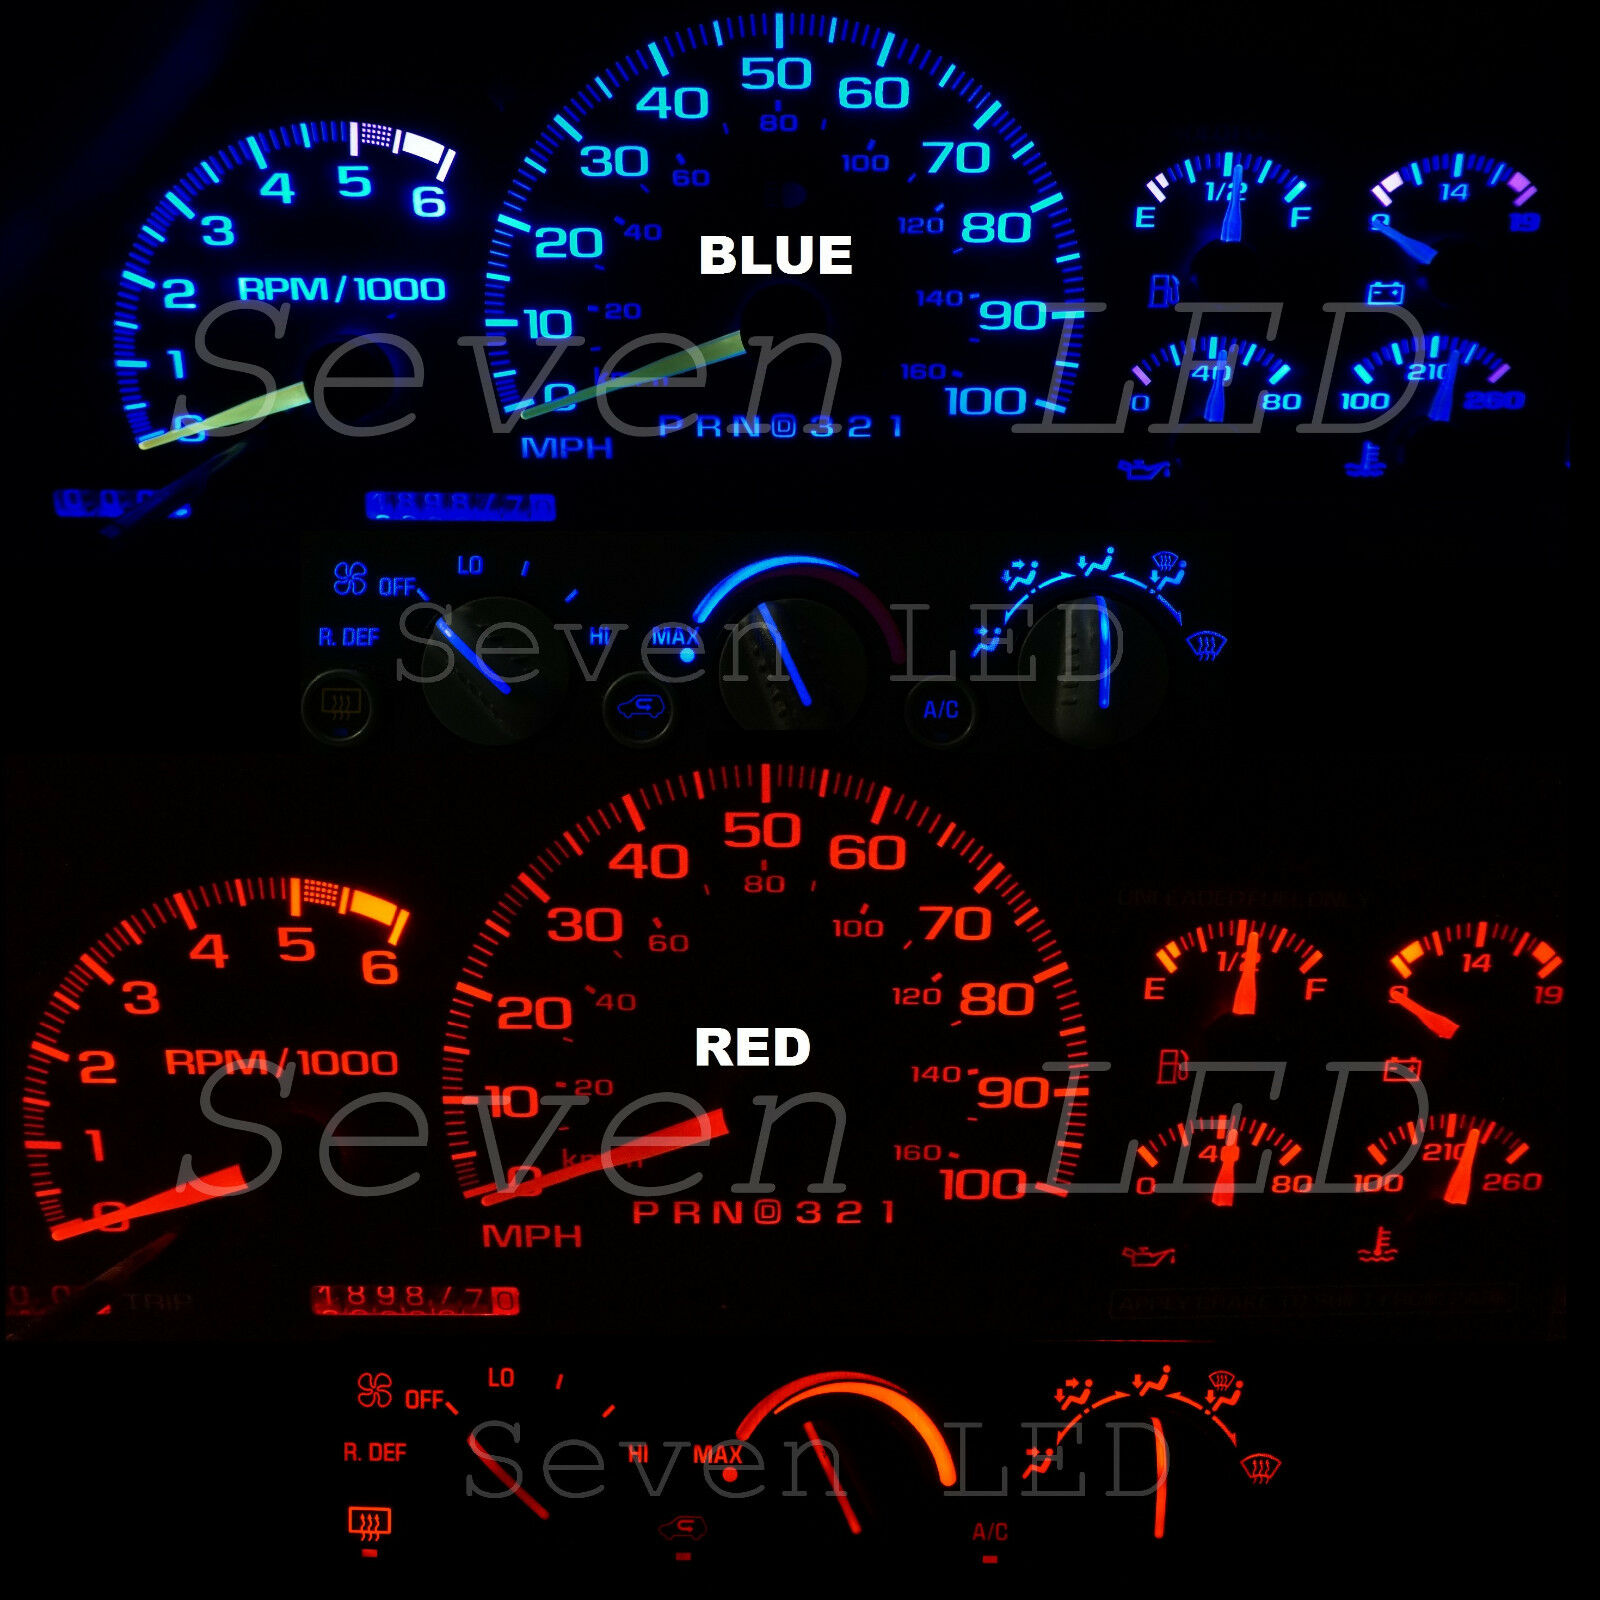 LED KIT for Silverado Tahoe Suburban GMC 95-99 CHEVY CLUSTER + Climate Control